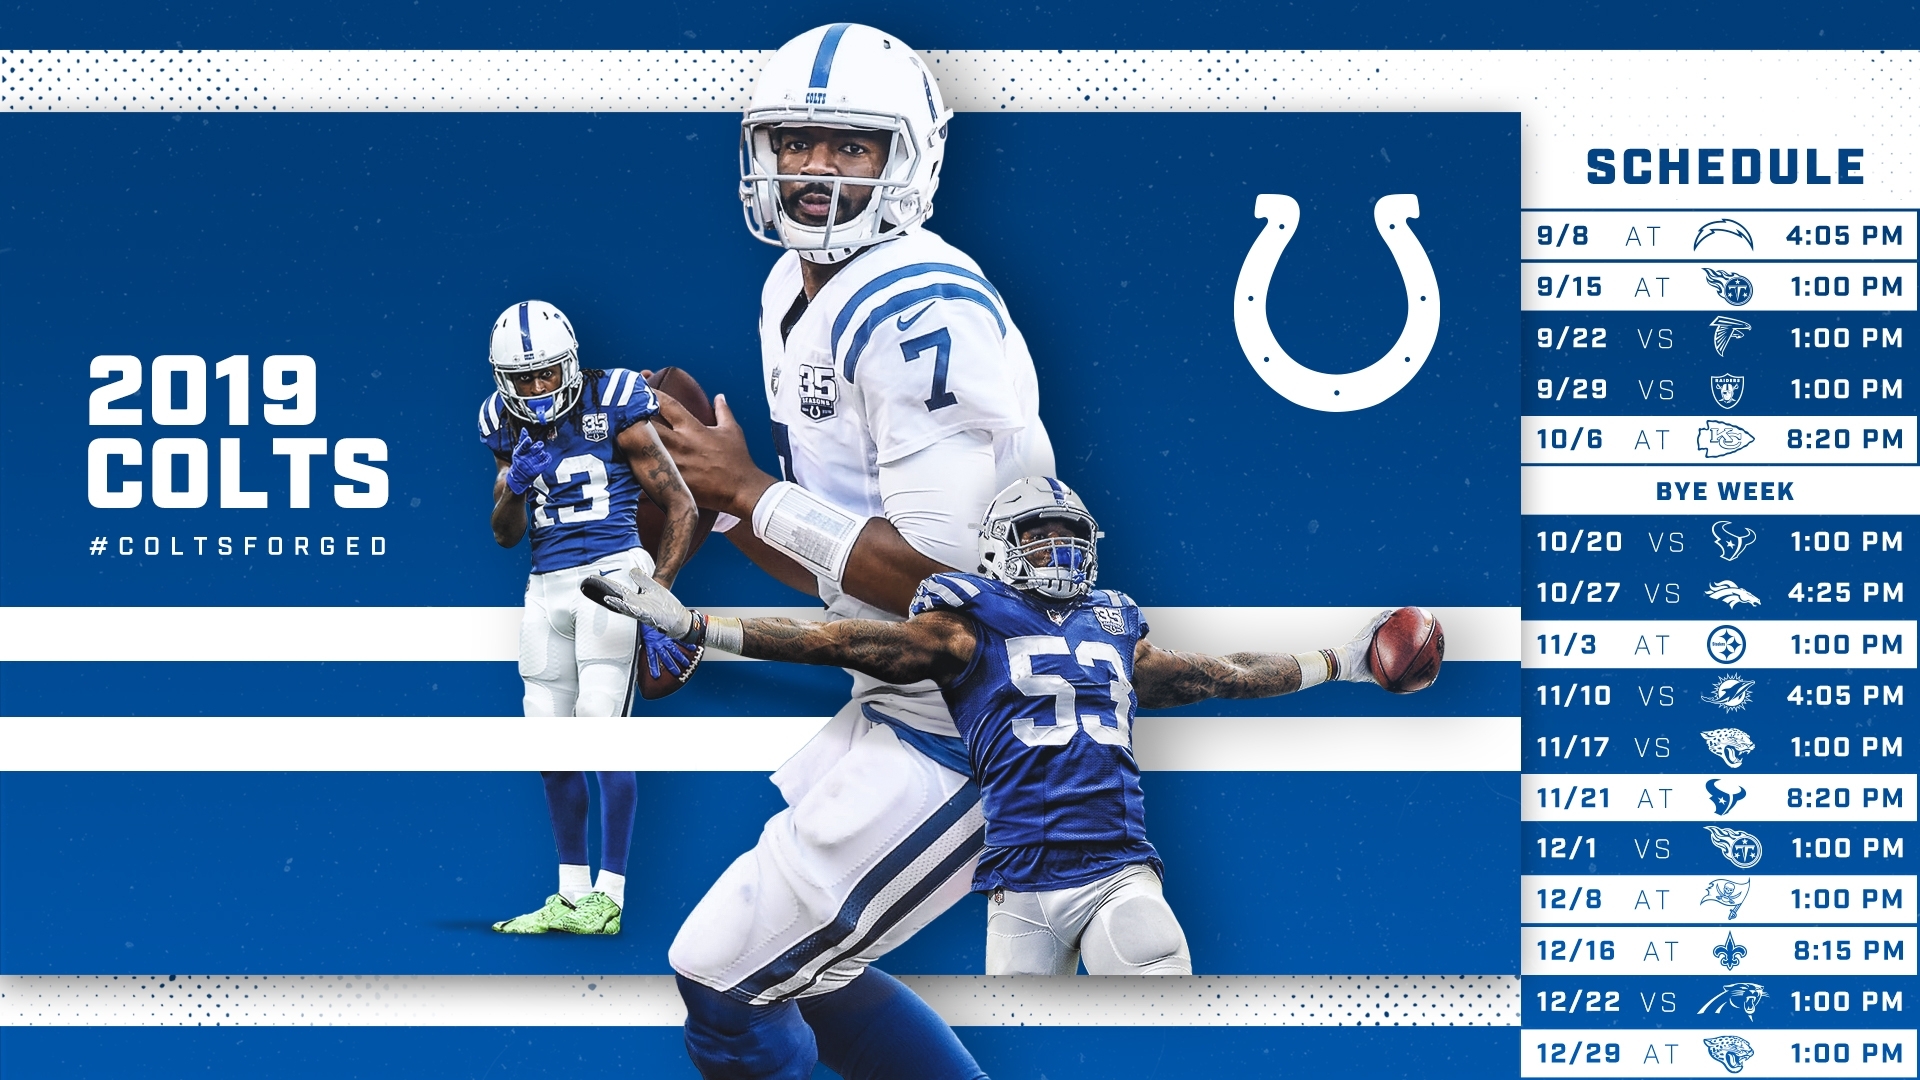 Indianapolis Colts Schedule intended for Printable Seahawks Schedule Tv 2019- 2020